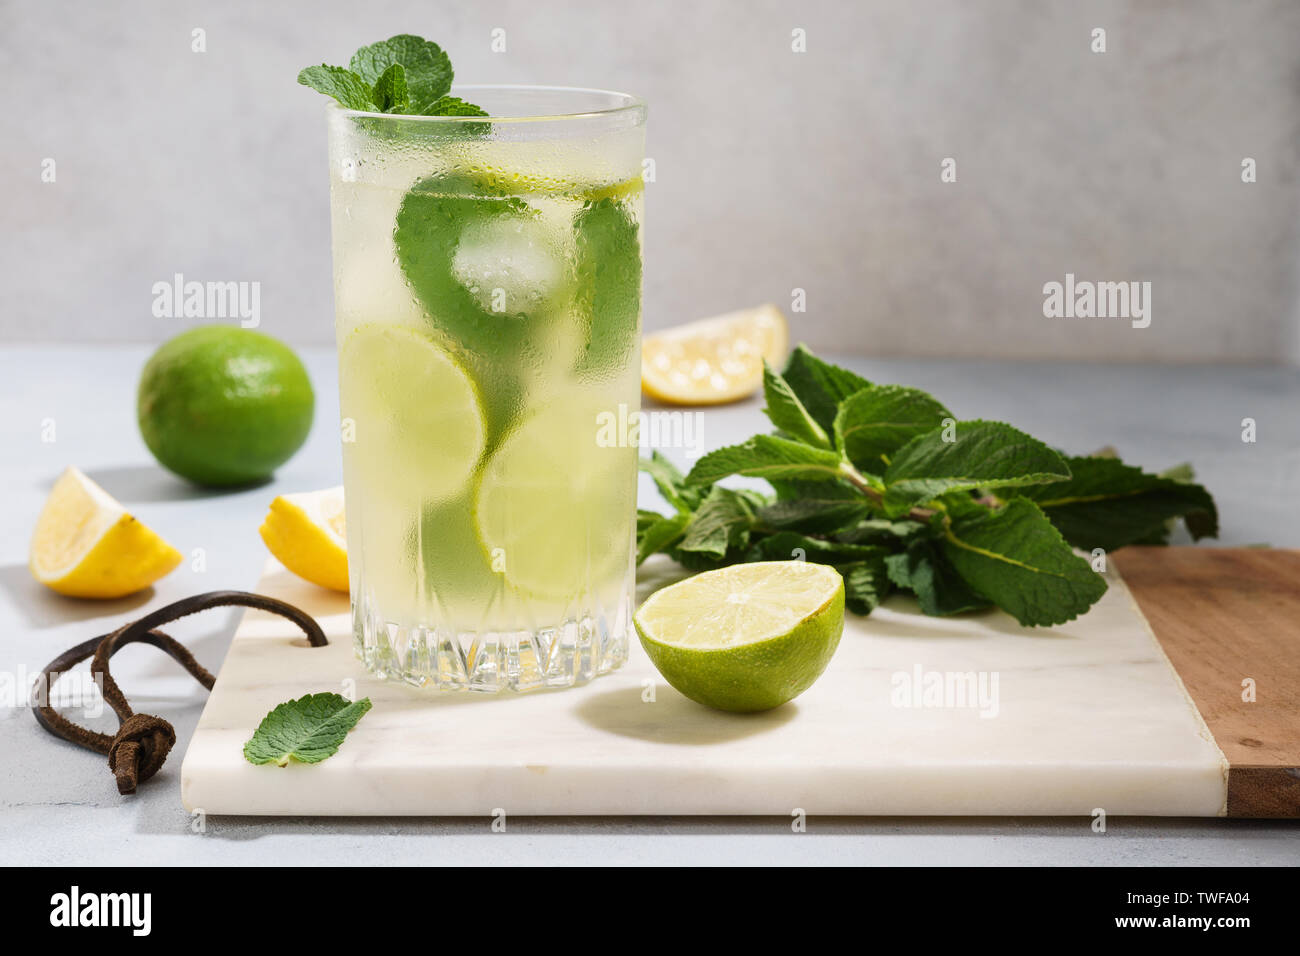 Detox water infused with sliced lemon, lime and mint. Healthy drink concept. Stock Photo